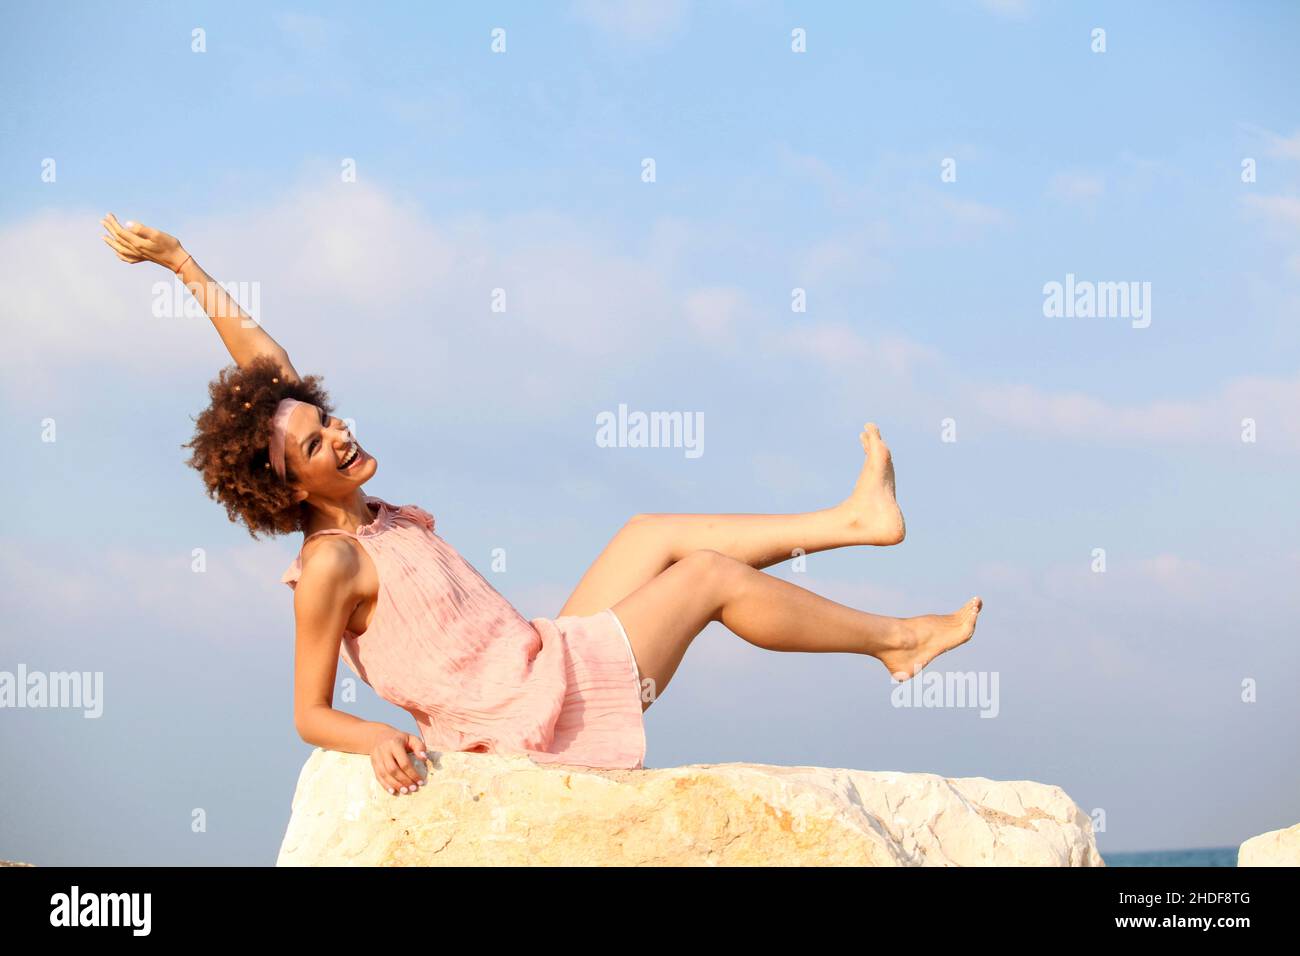 A happy, smiling 28 year old new age style woman sits on a rock on the beach Stock Photo